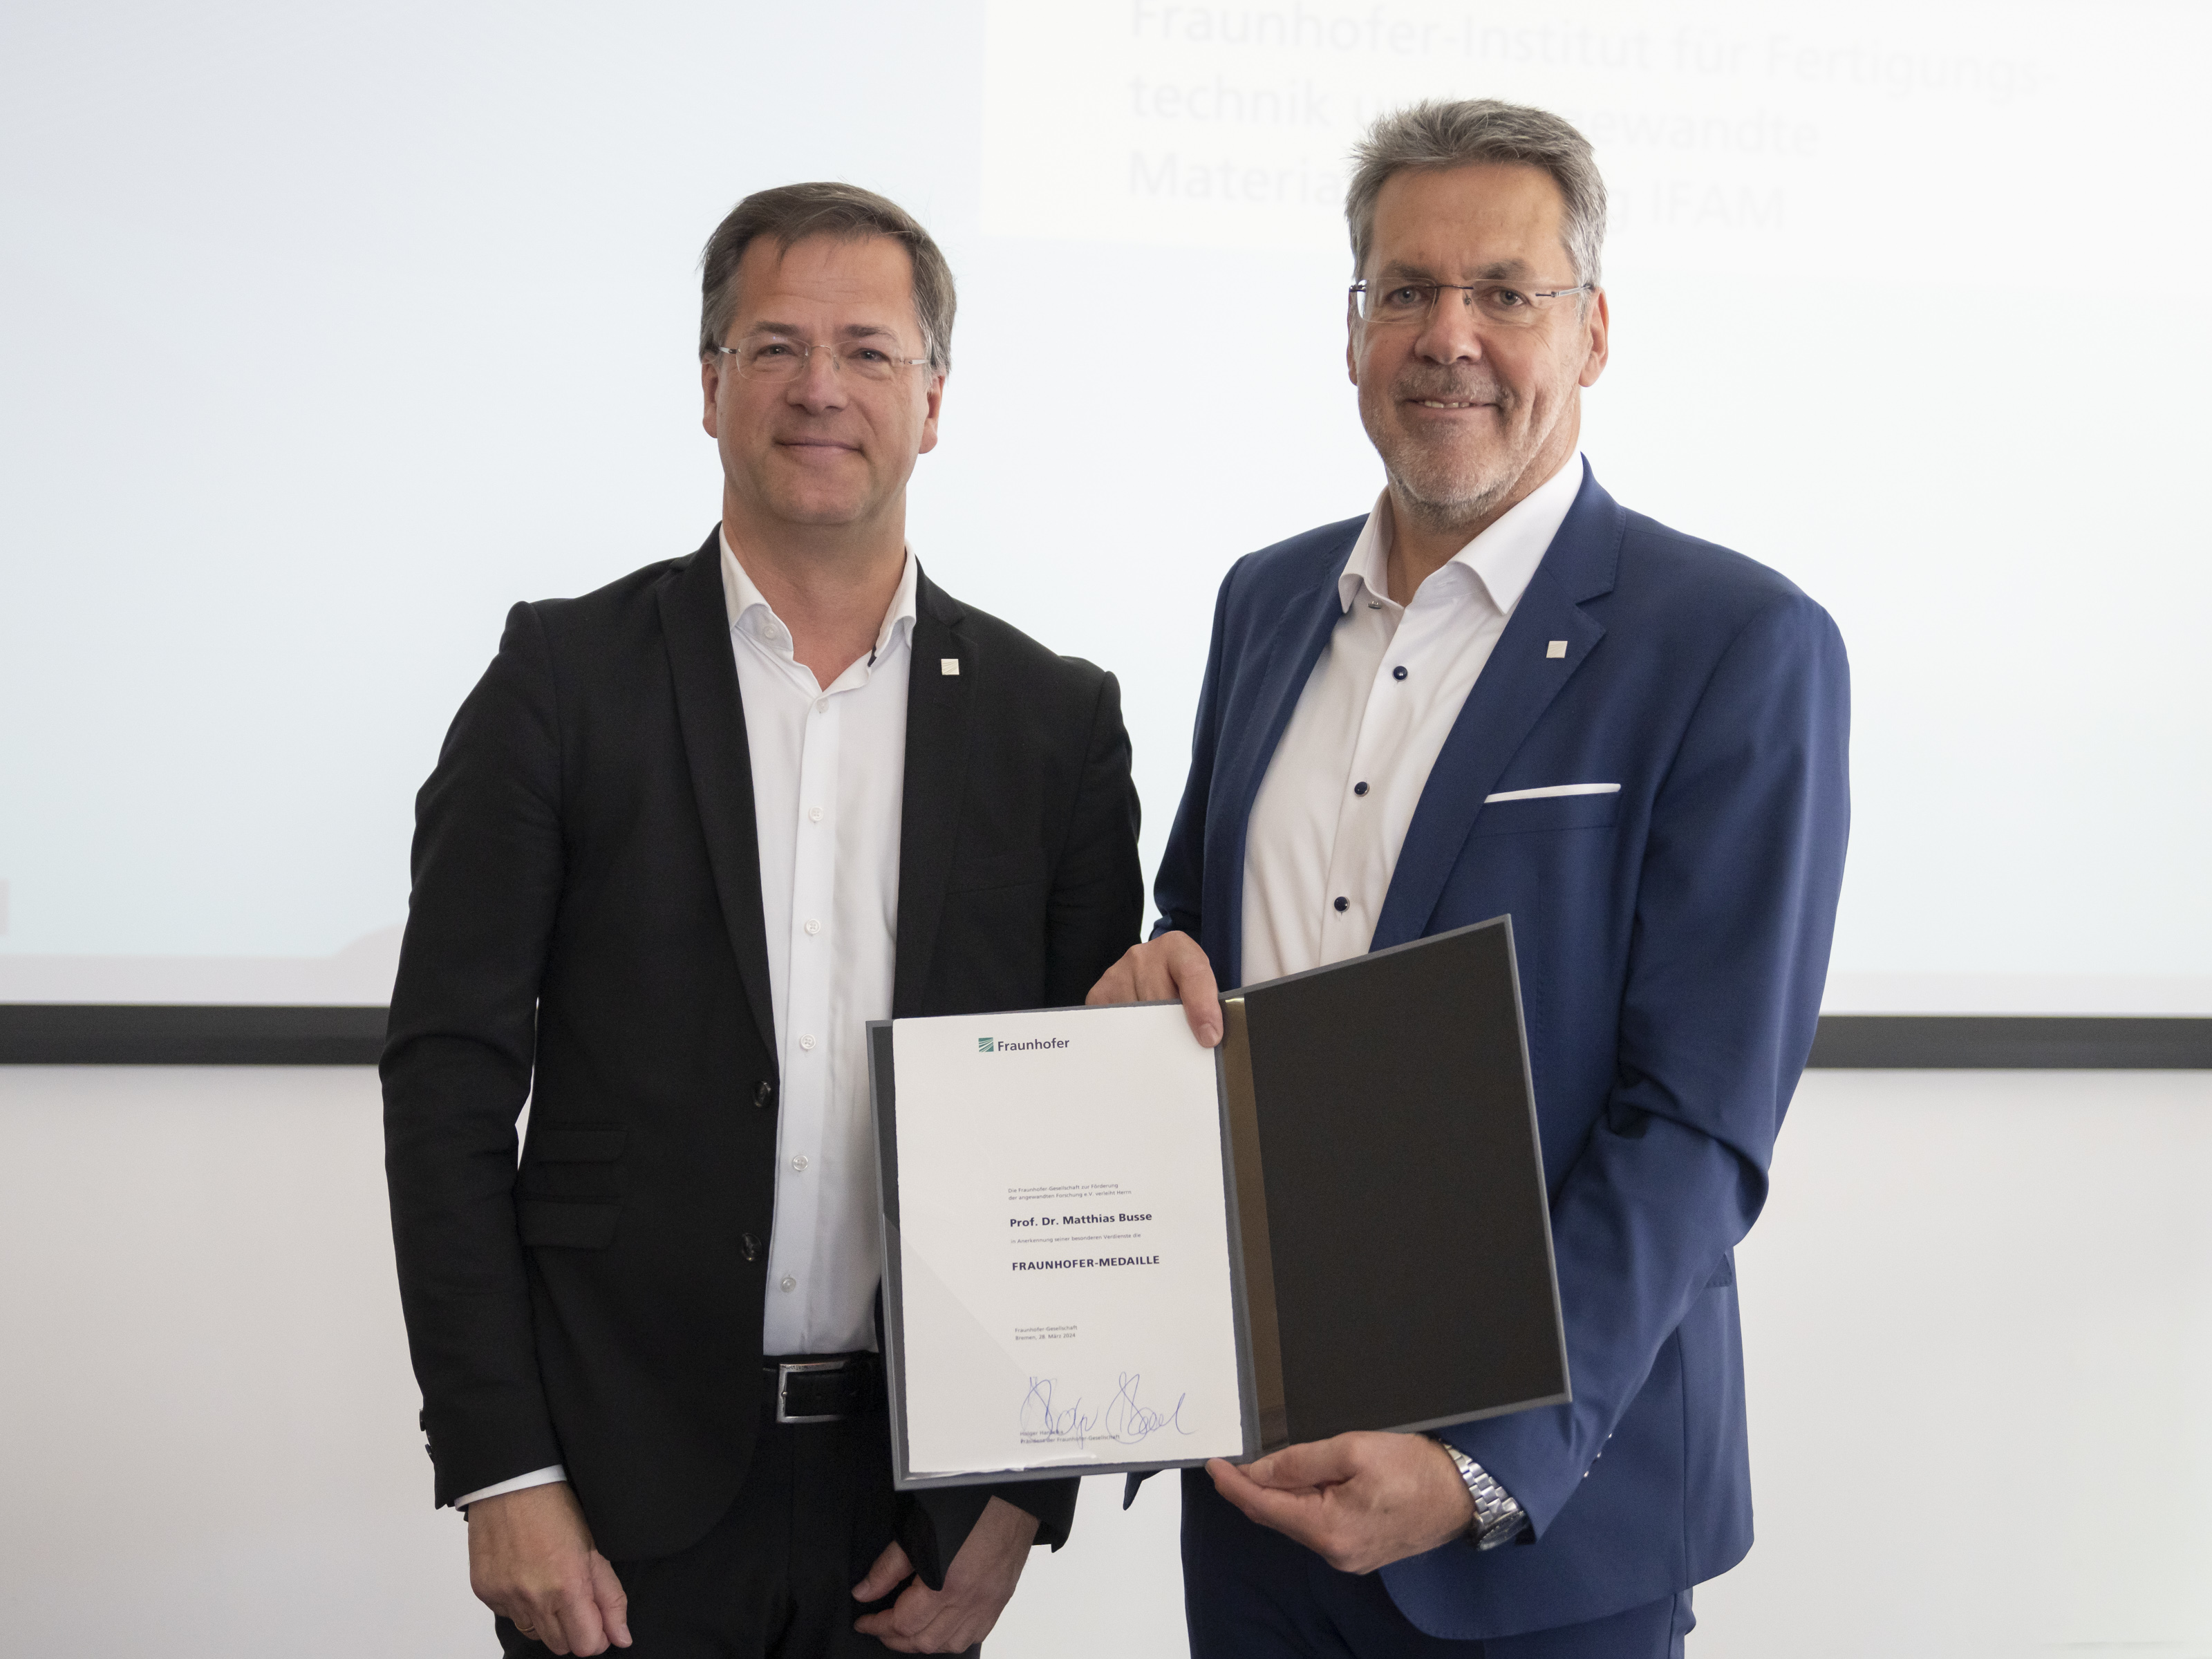 Prof. Dr. Axel Müller-Groeling (left), Executive Board of the Fraunhofer-Gesellschaft e.V., presented Prof. Dr.-Ing. Matthias Busse (right) with the Fraunhofer Medal for his achievements at his retirement ceremony. The medal honors individuals who have rendered outstanding services to the Fraunhofer-Gesellschaft.